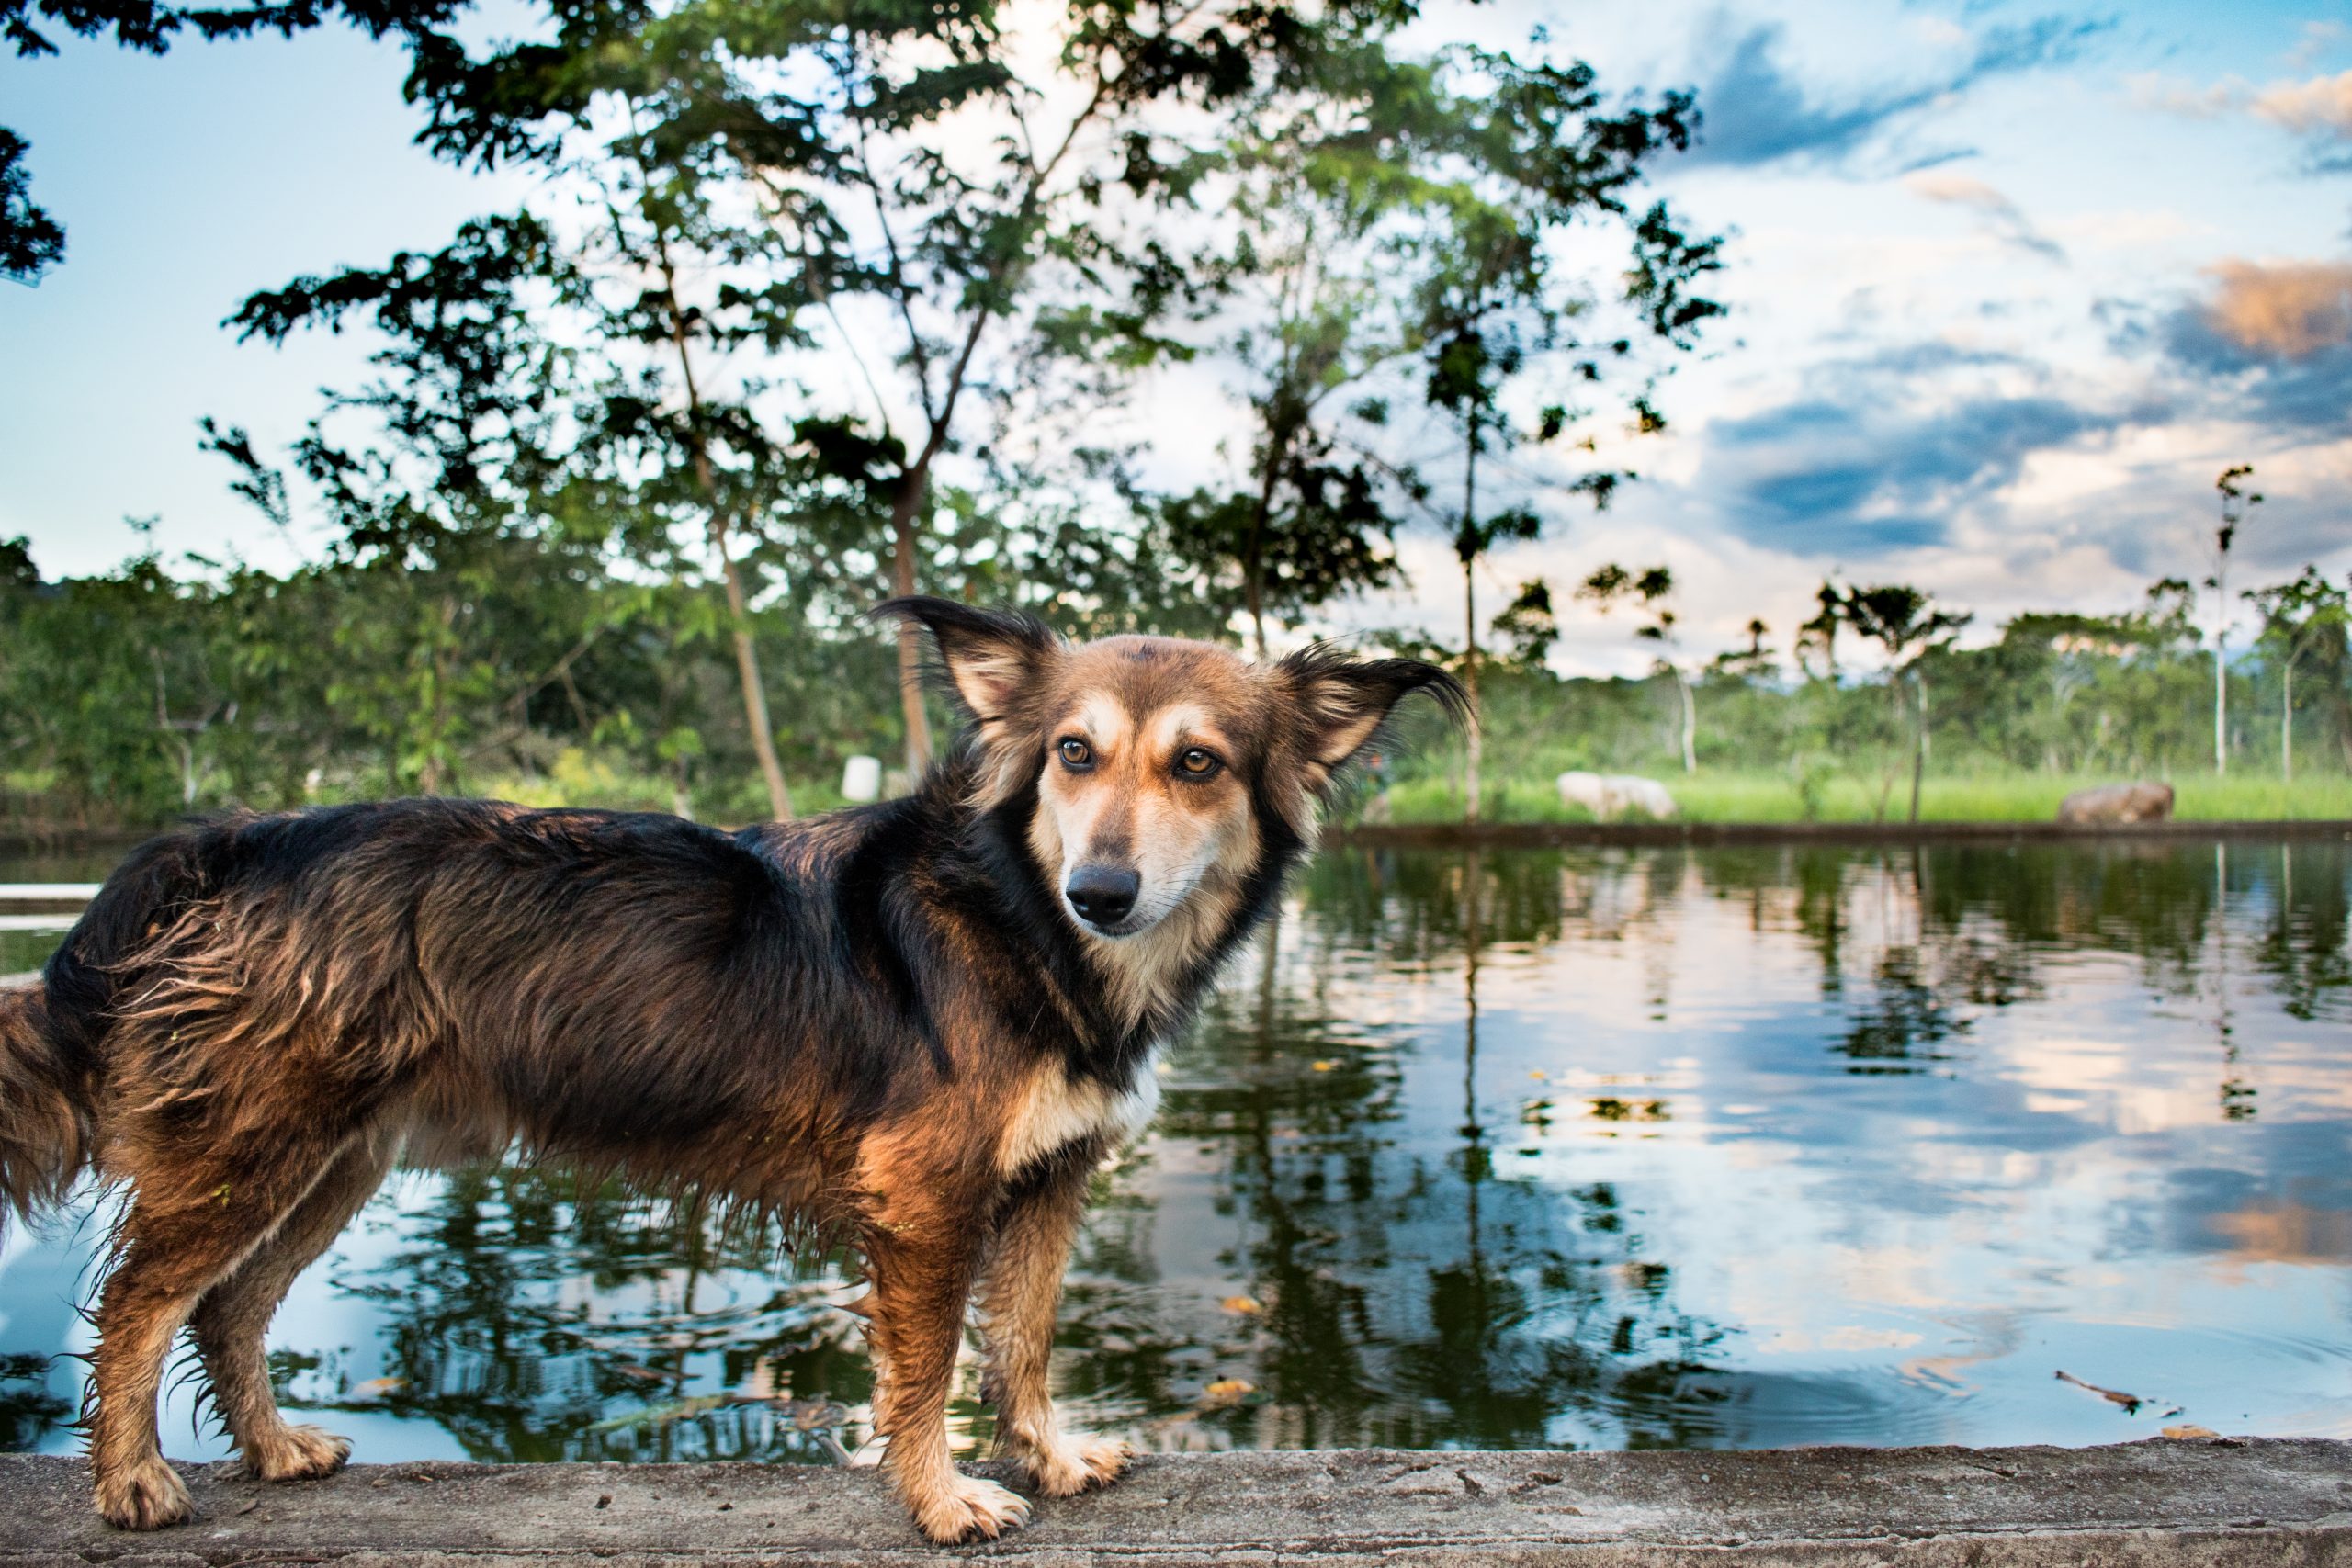 is aquaphor safe for dogs?